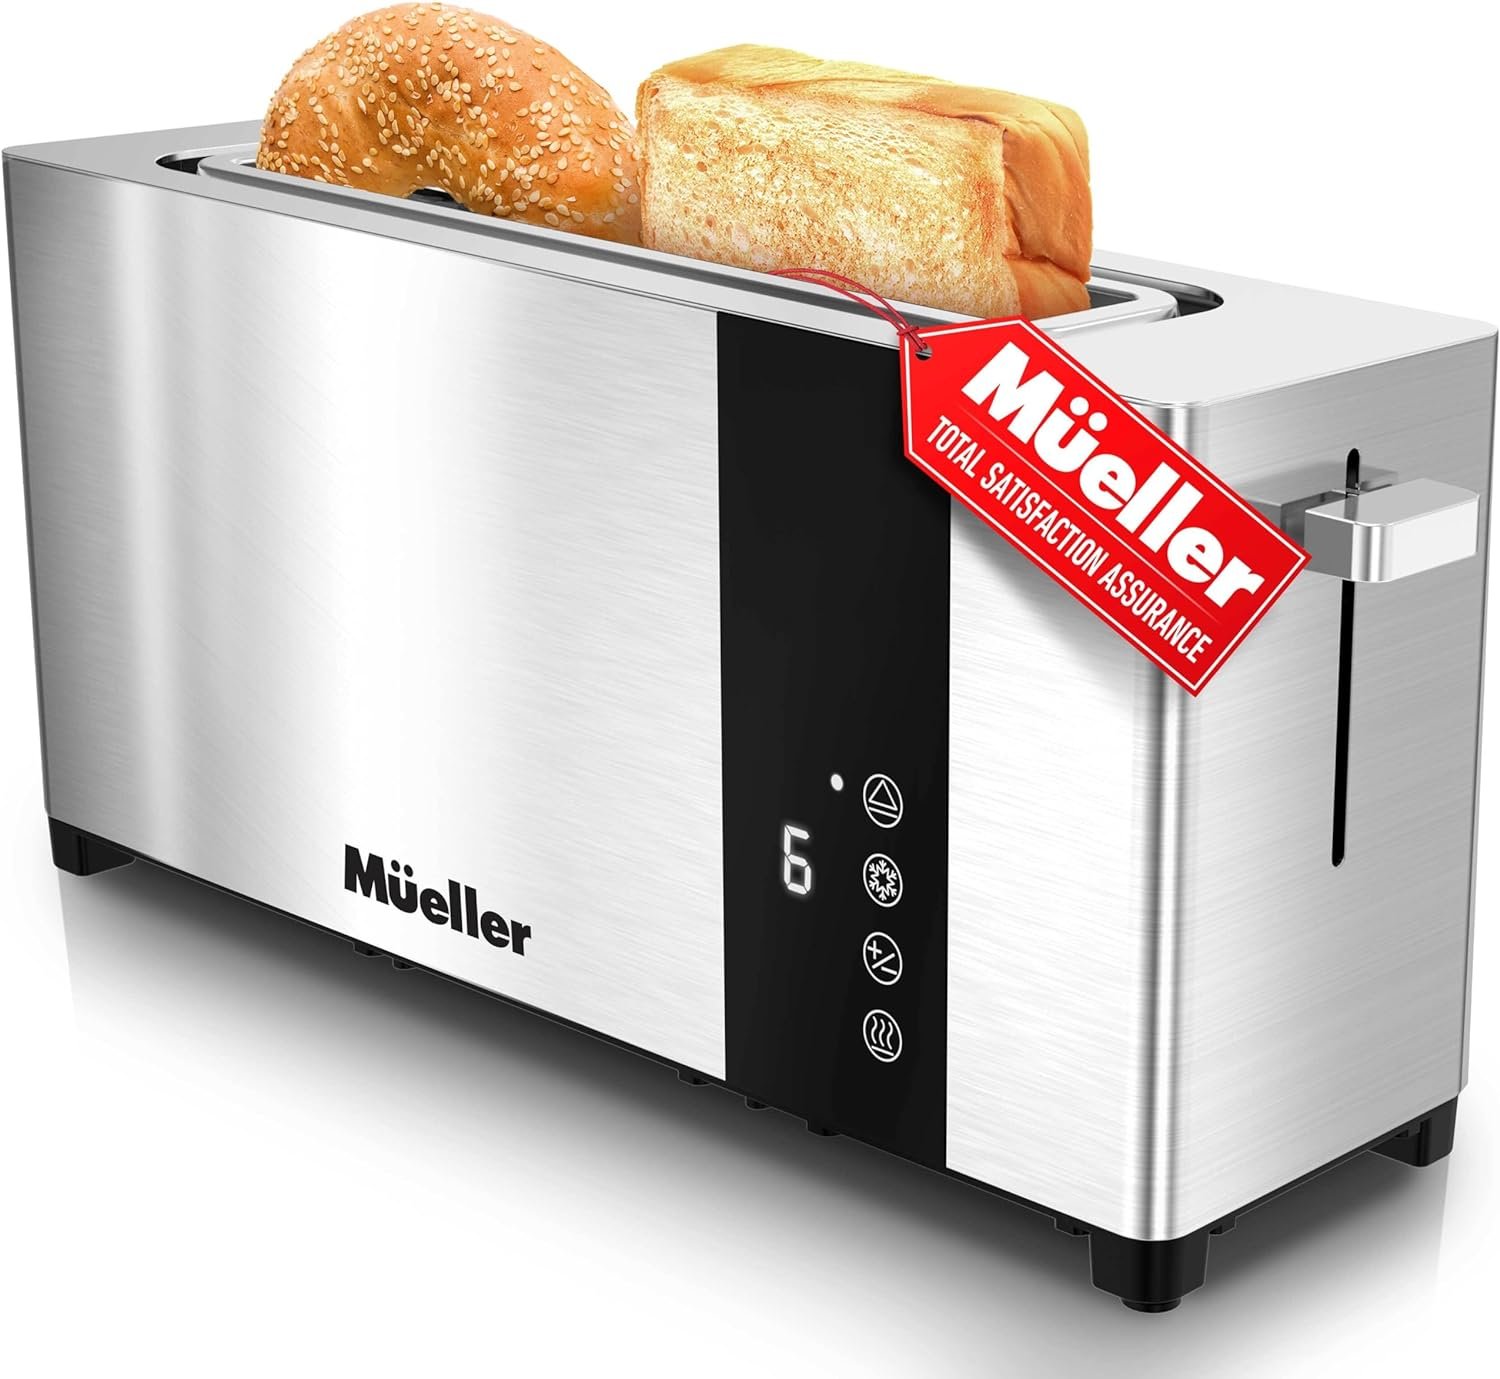 Mueller UltraToast Full Stainless Steel Toaster 2 Slice, Long Extra-Wide Slots with Removable Tray, Cancel/Defrost/Reheat Functions, 6 Browning Levels with LED Display